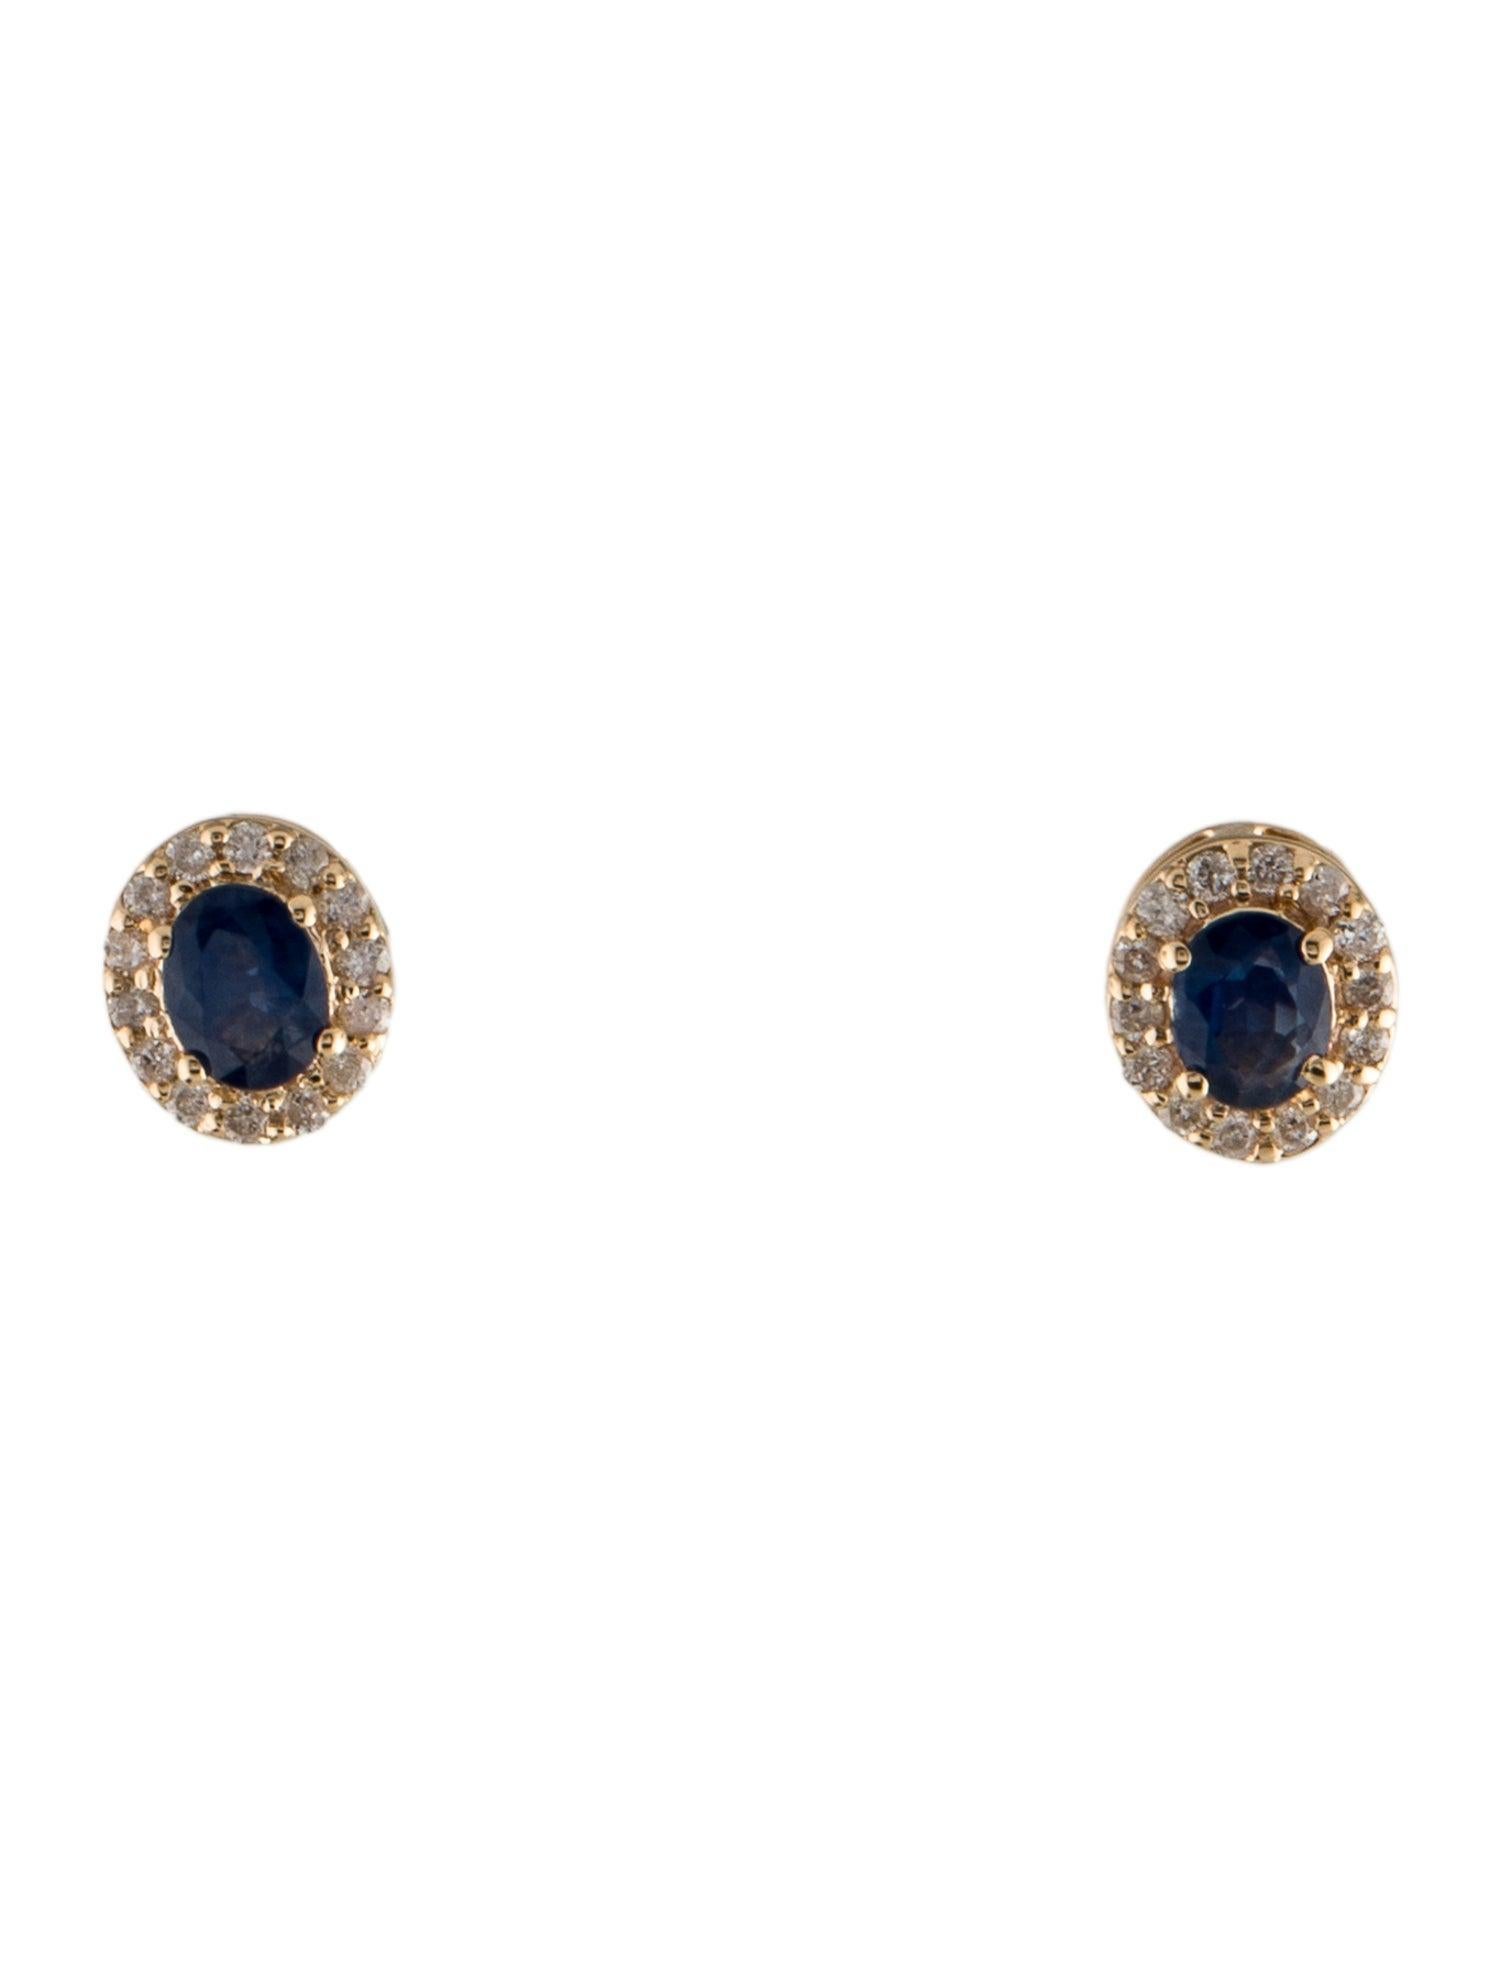 Immerse yourself in the enchanting allure of the ocean with our Beneath the Waves Sapphire and Diamond Earrings. Crafted with precision and passion, these earrings are a stunning embodiment of the ocean's mesmerizing beauty. The collection takes